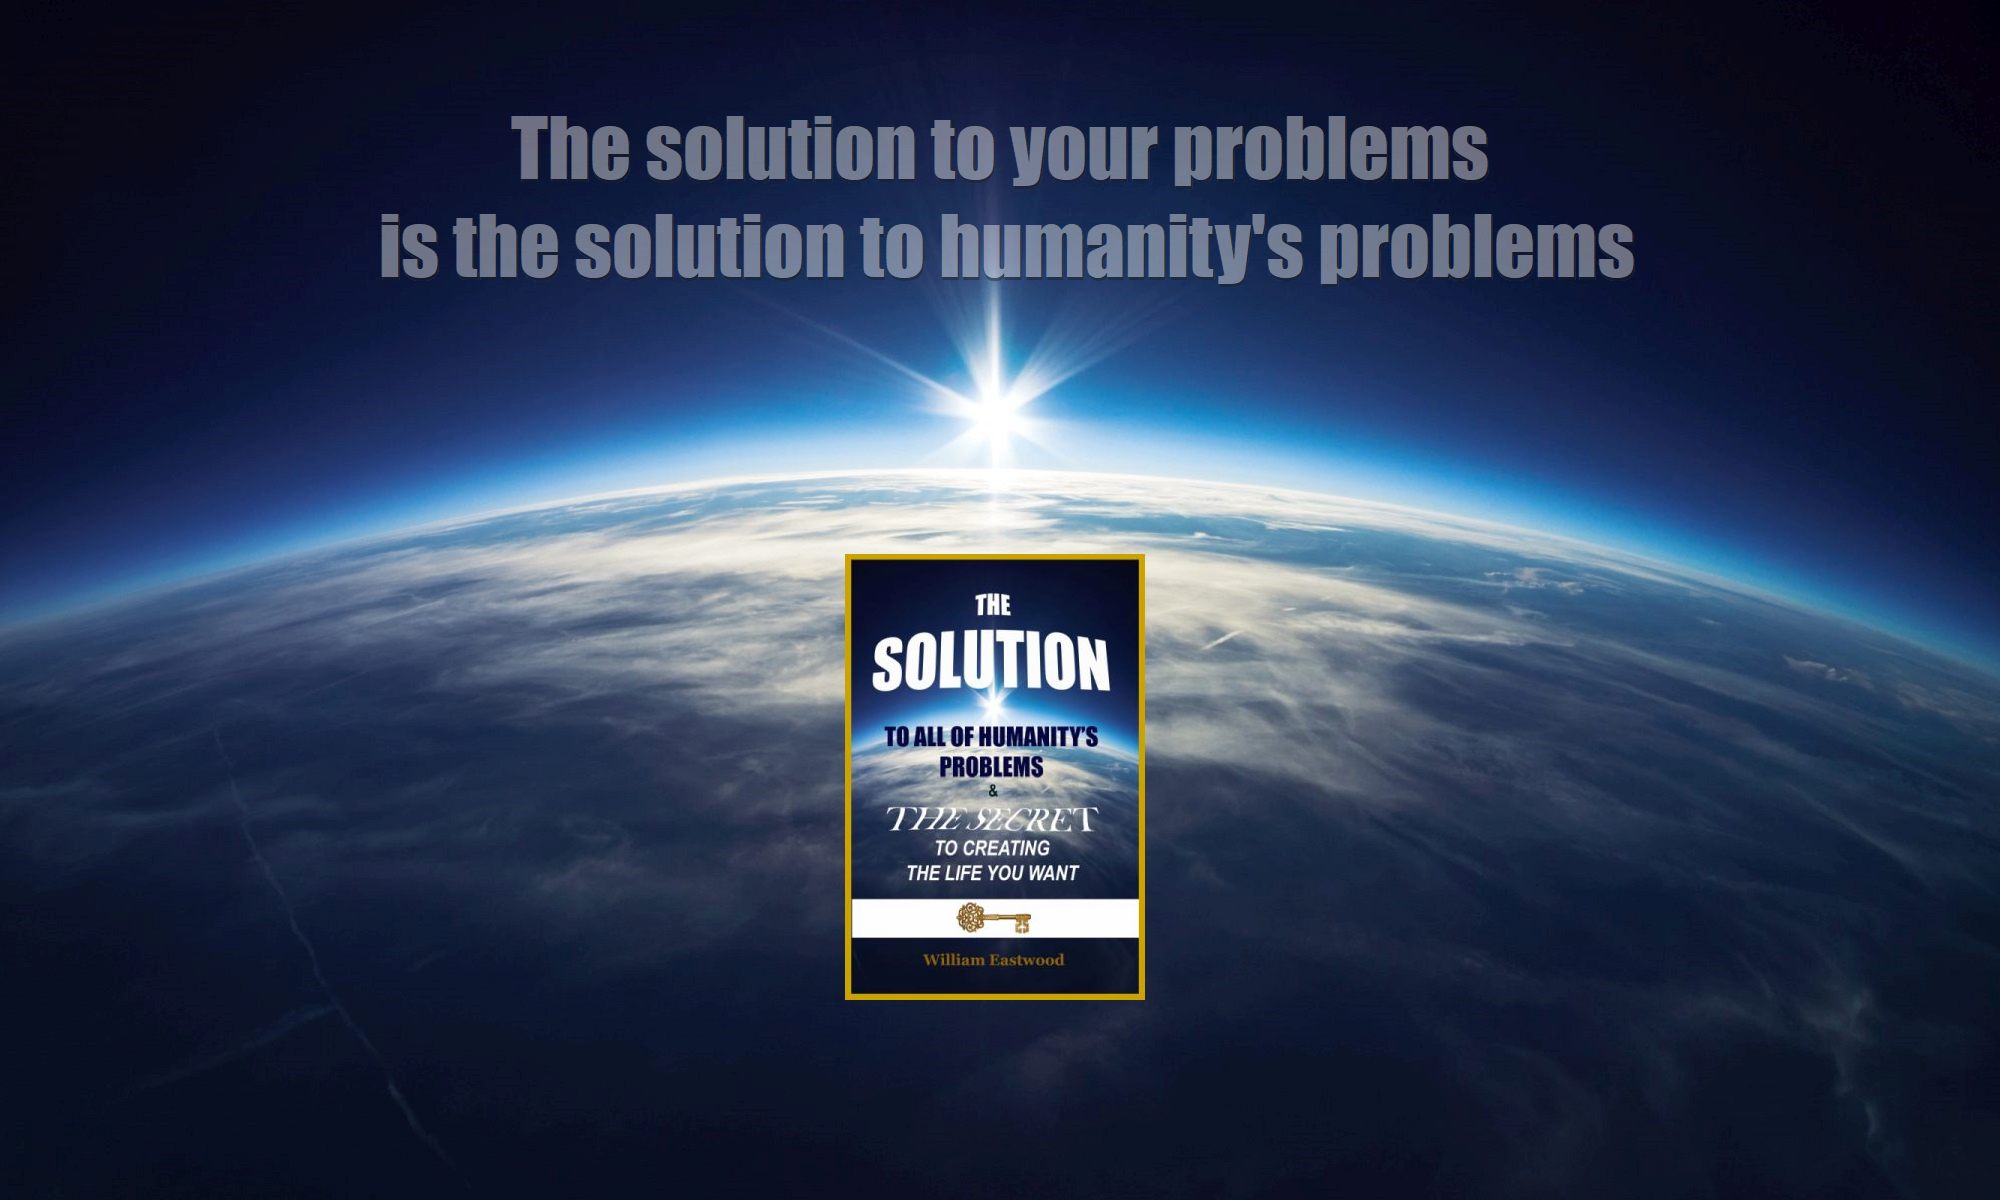 The Solution over earth